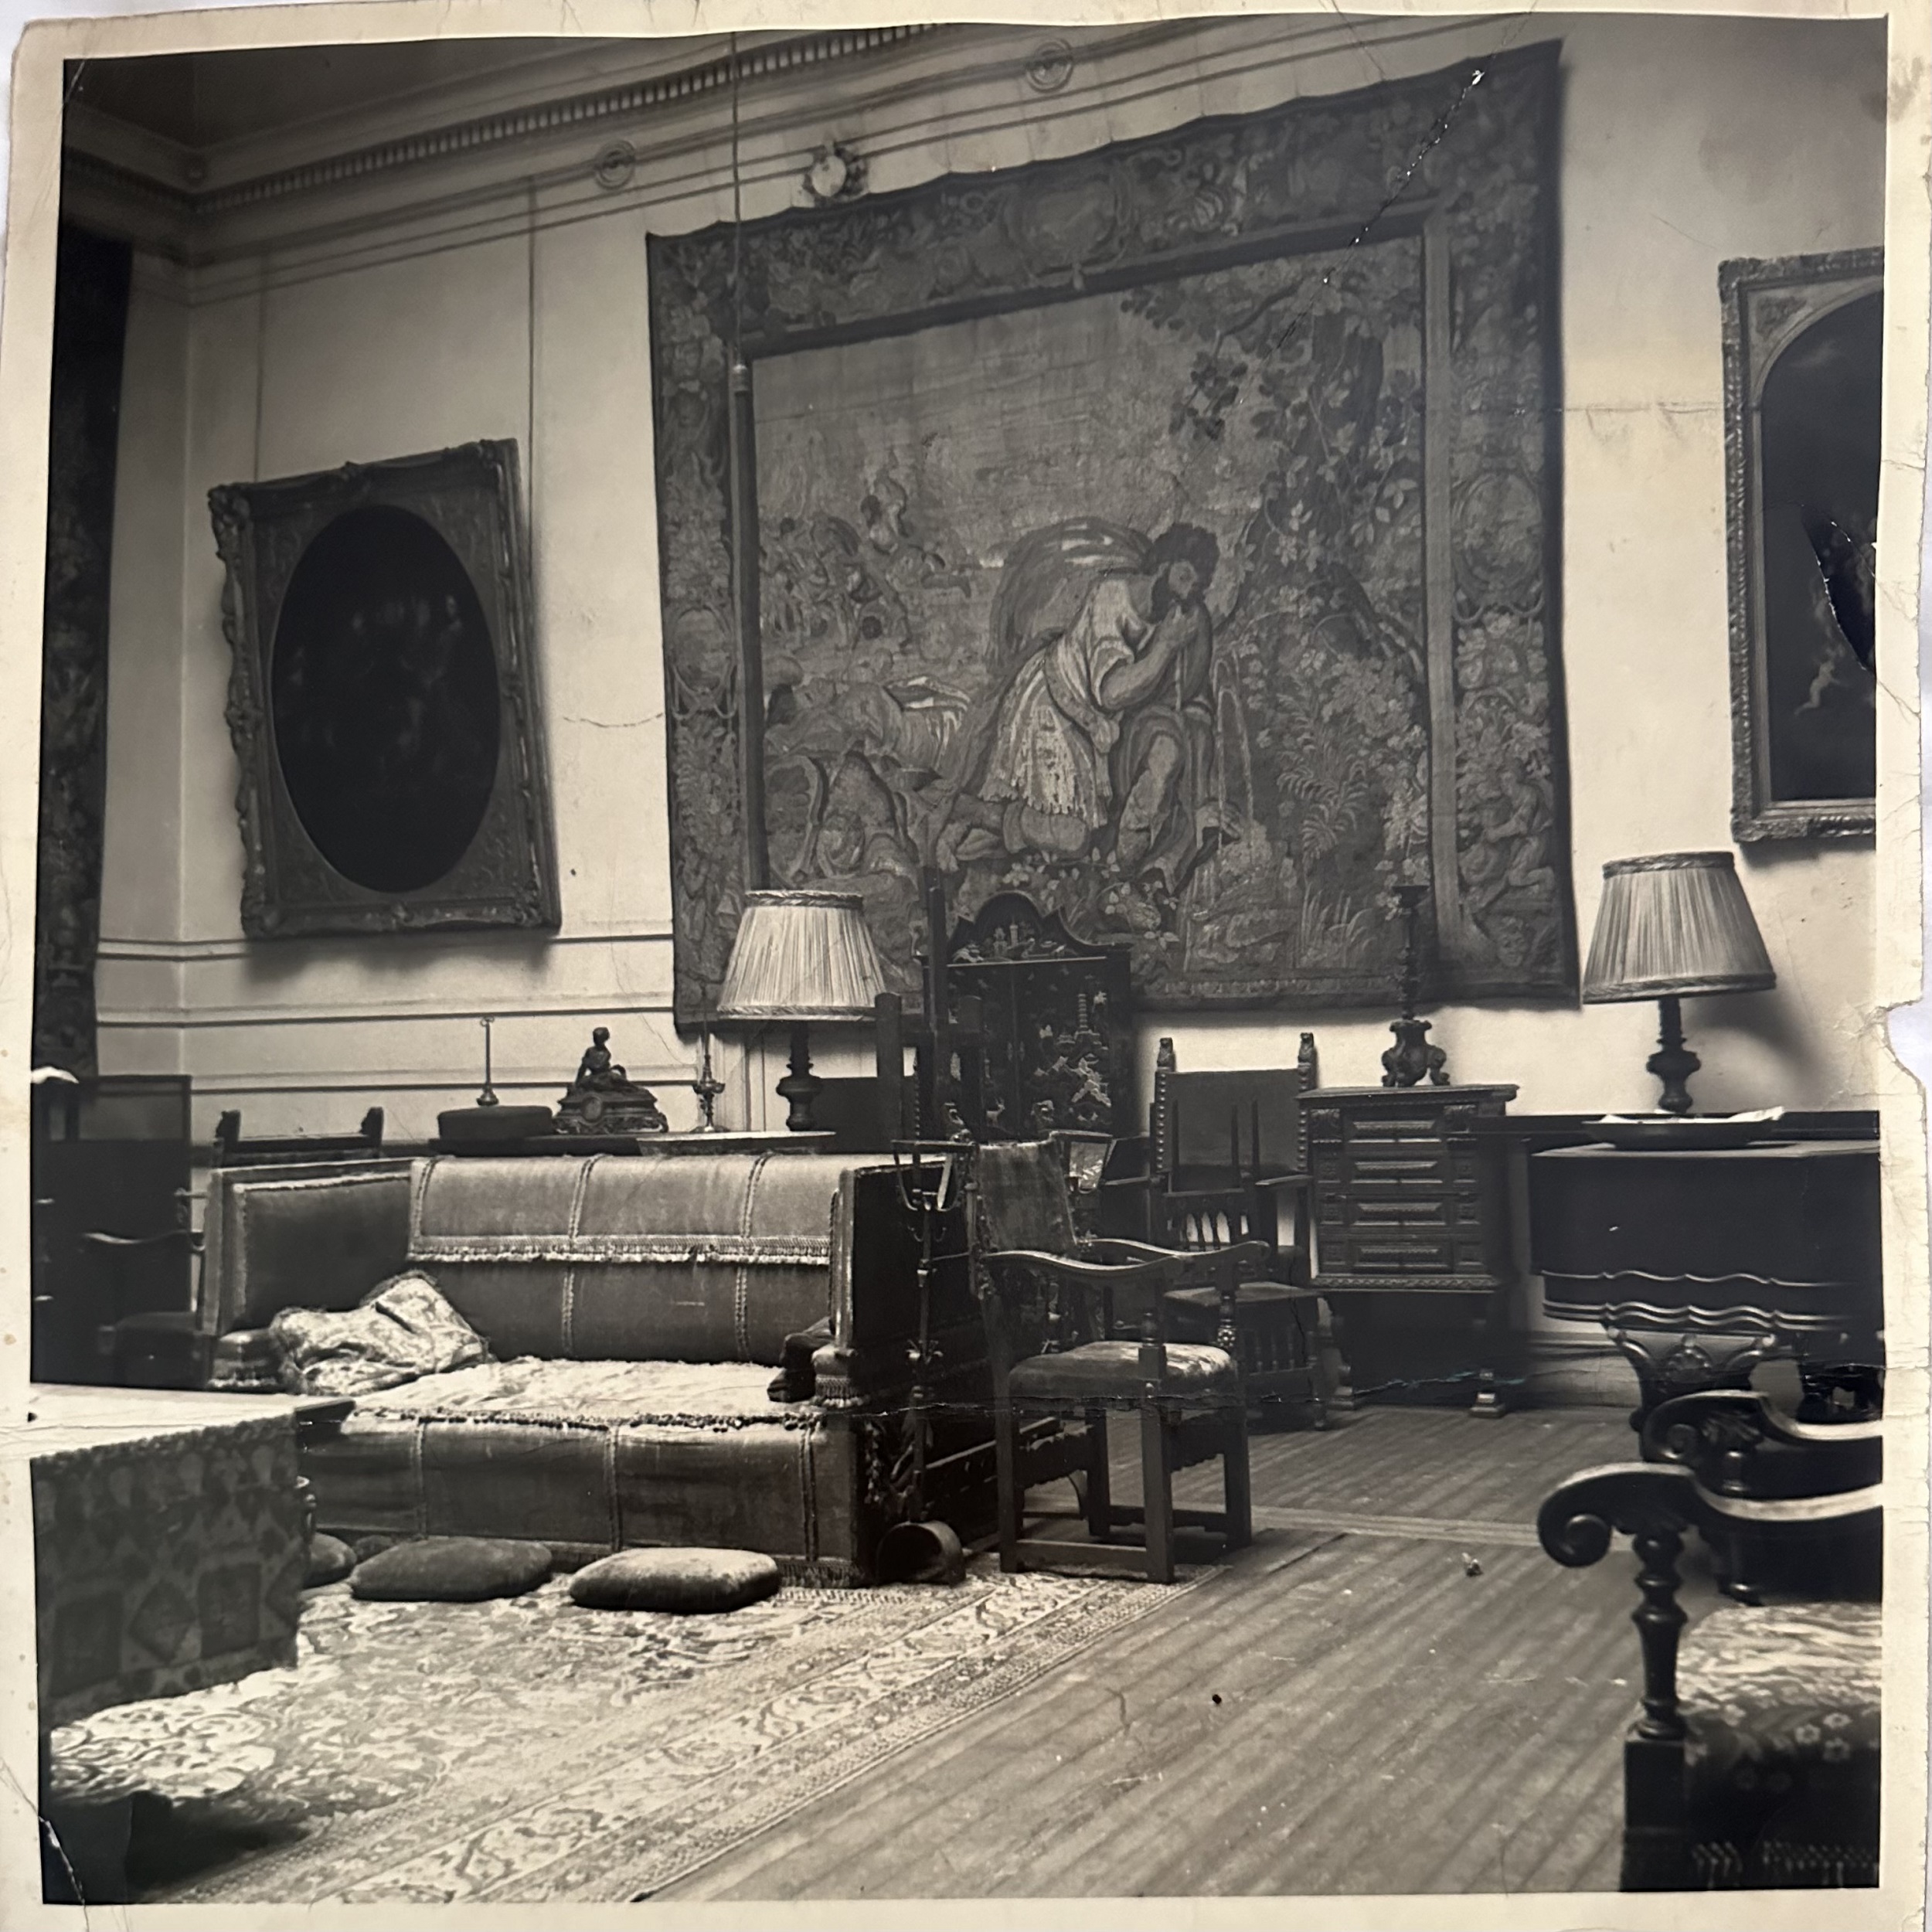 Black-and-white historic photograph of the interior of a high-ceilinged domestic space hung with paintings and a tapestry.